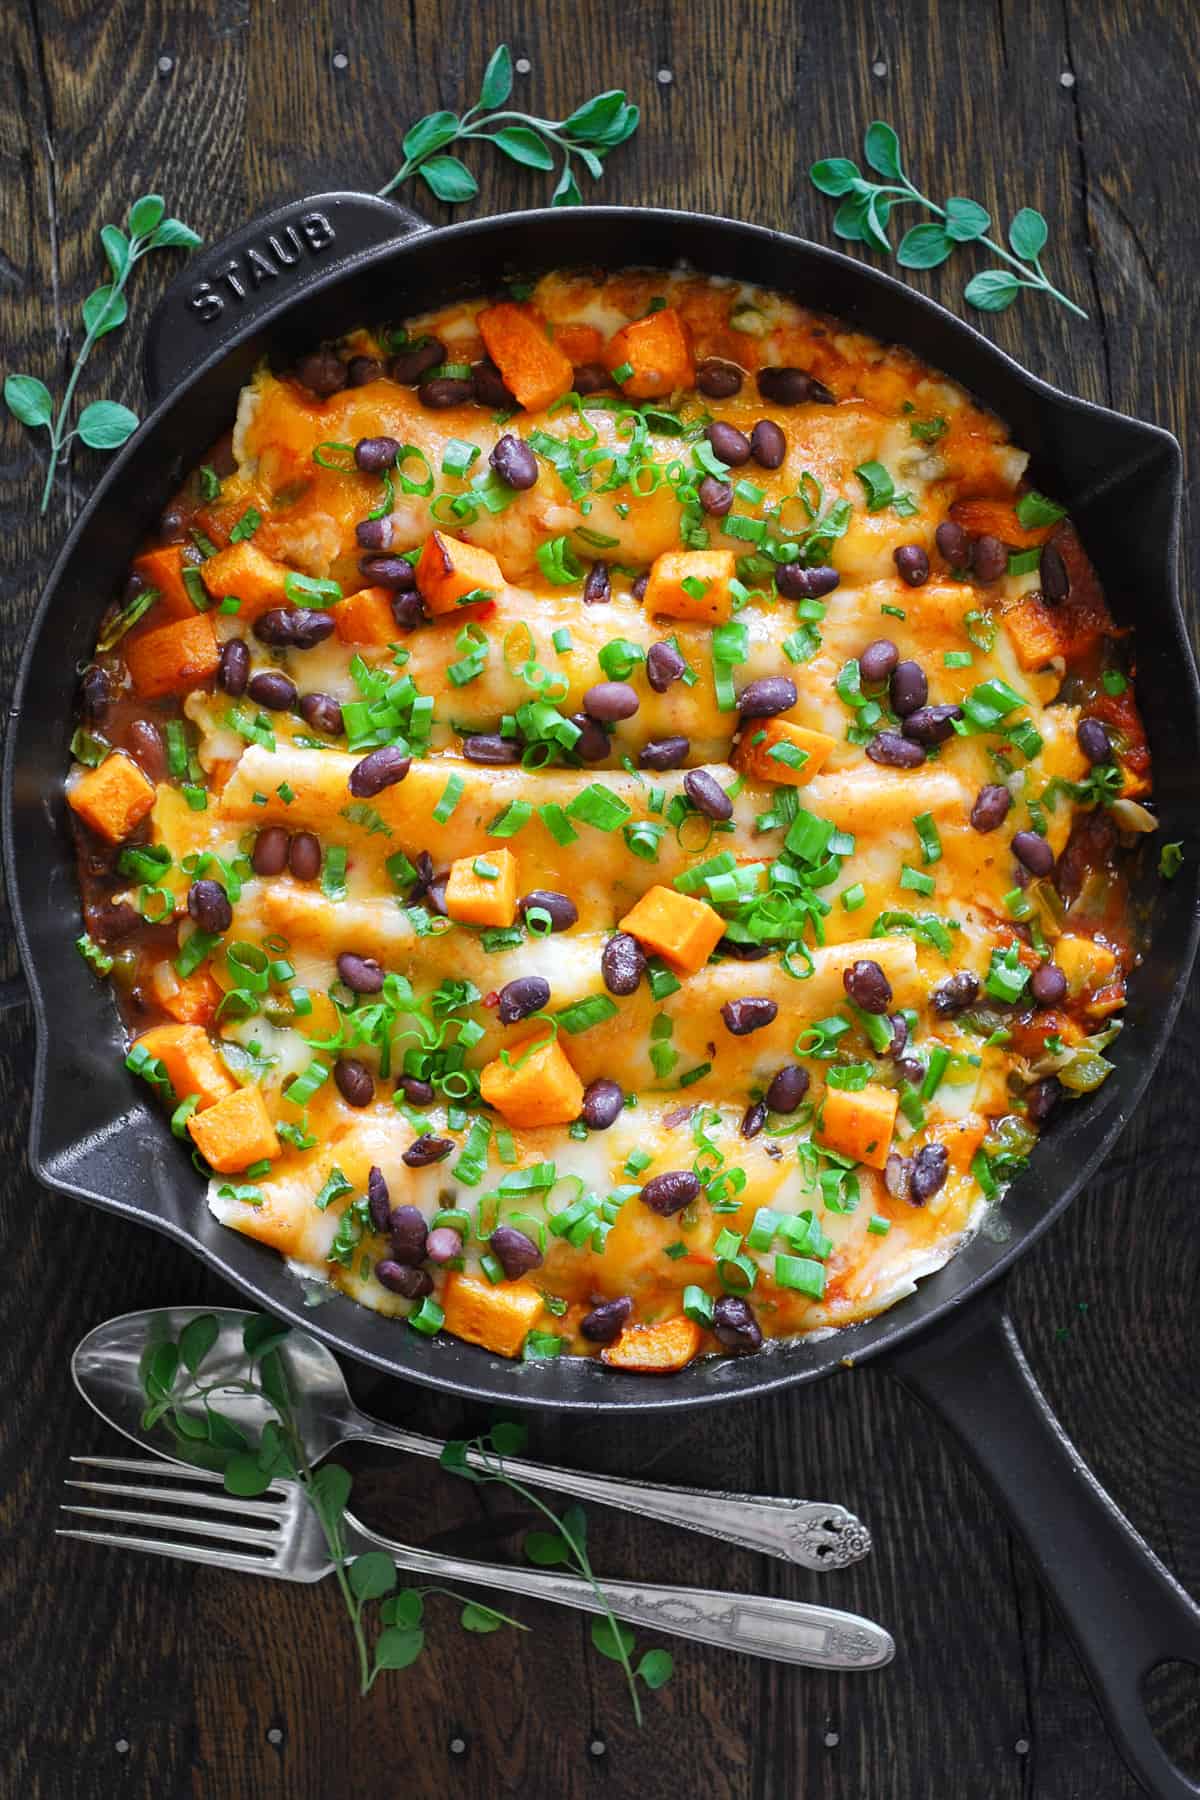 Vegetarian Enchiladas with Butternut Squash and Black Beans in a cast iron pan.